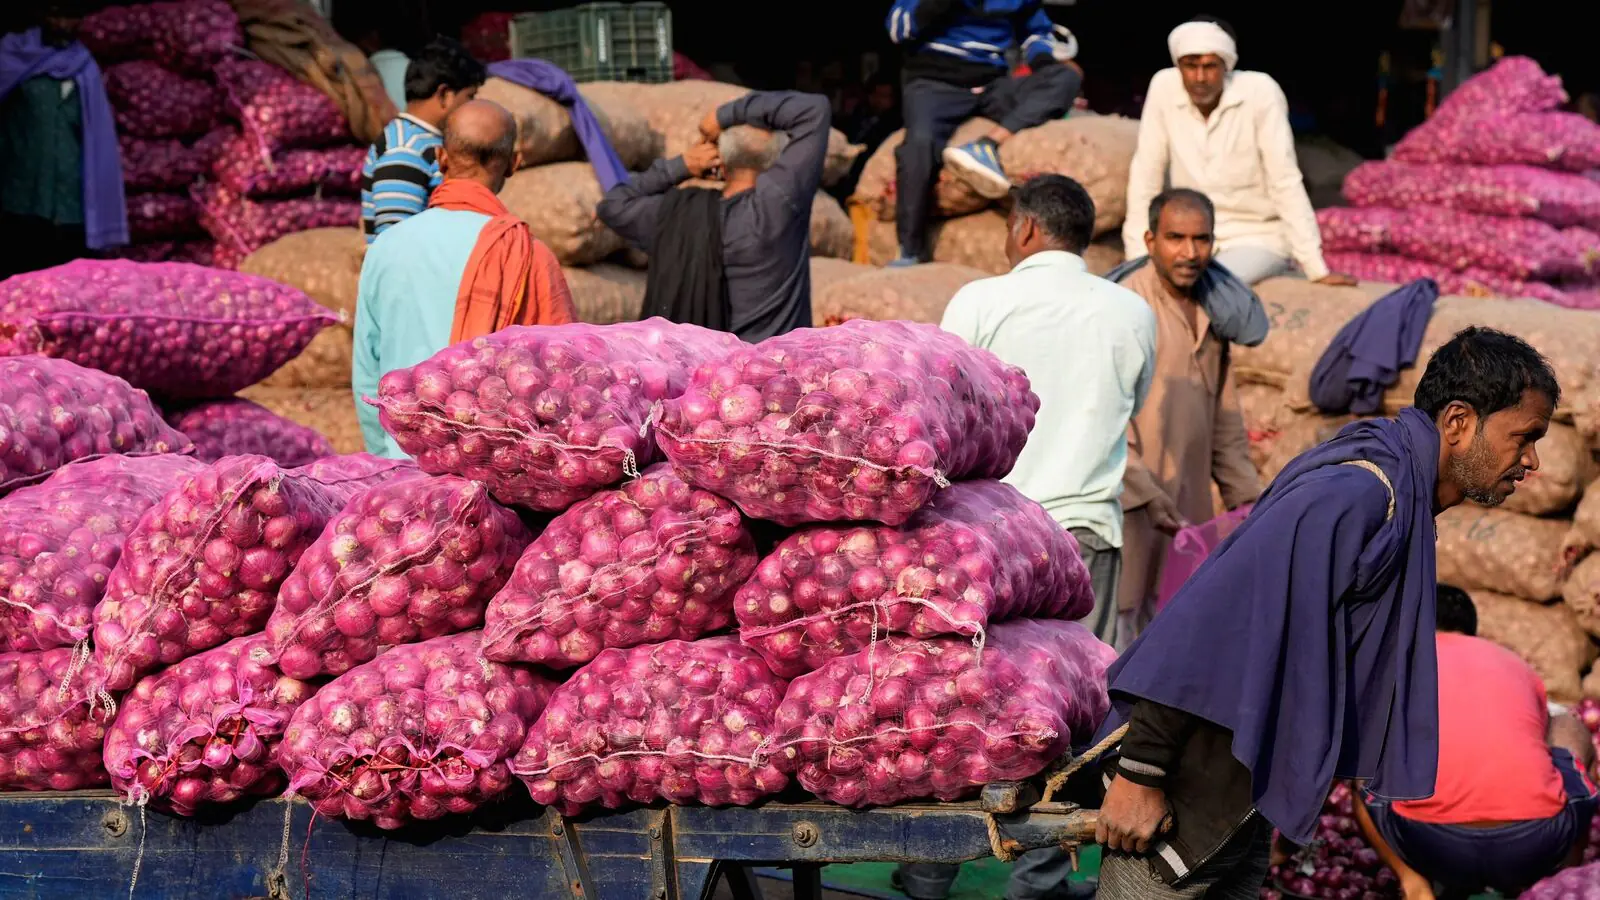 Wholesale potato and onion prices rose by over 50% prior to the Lok Sabha elections, with the WPI at 0.53% in March